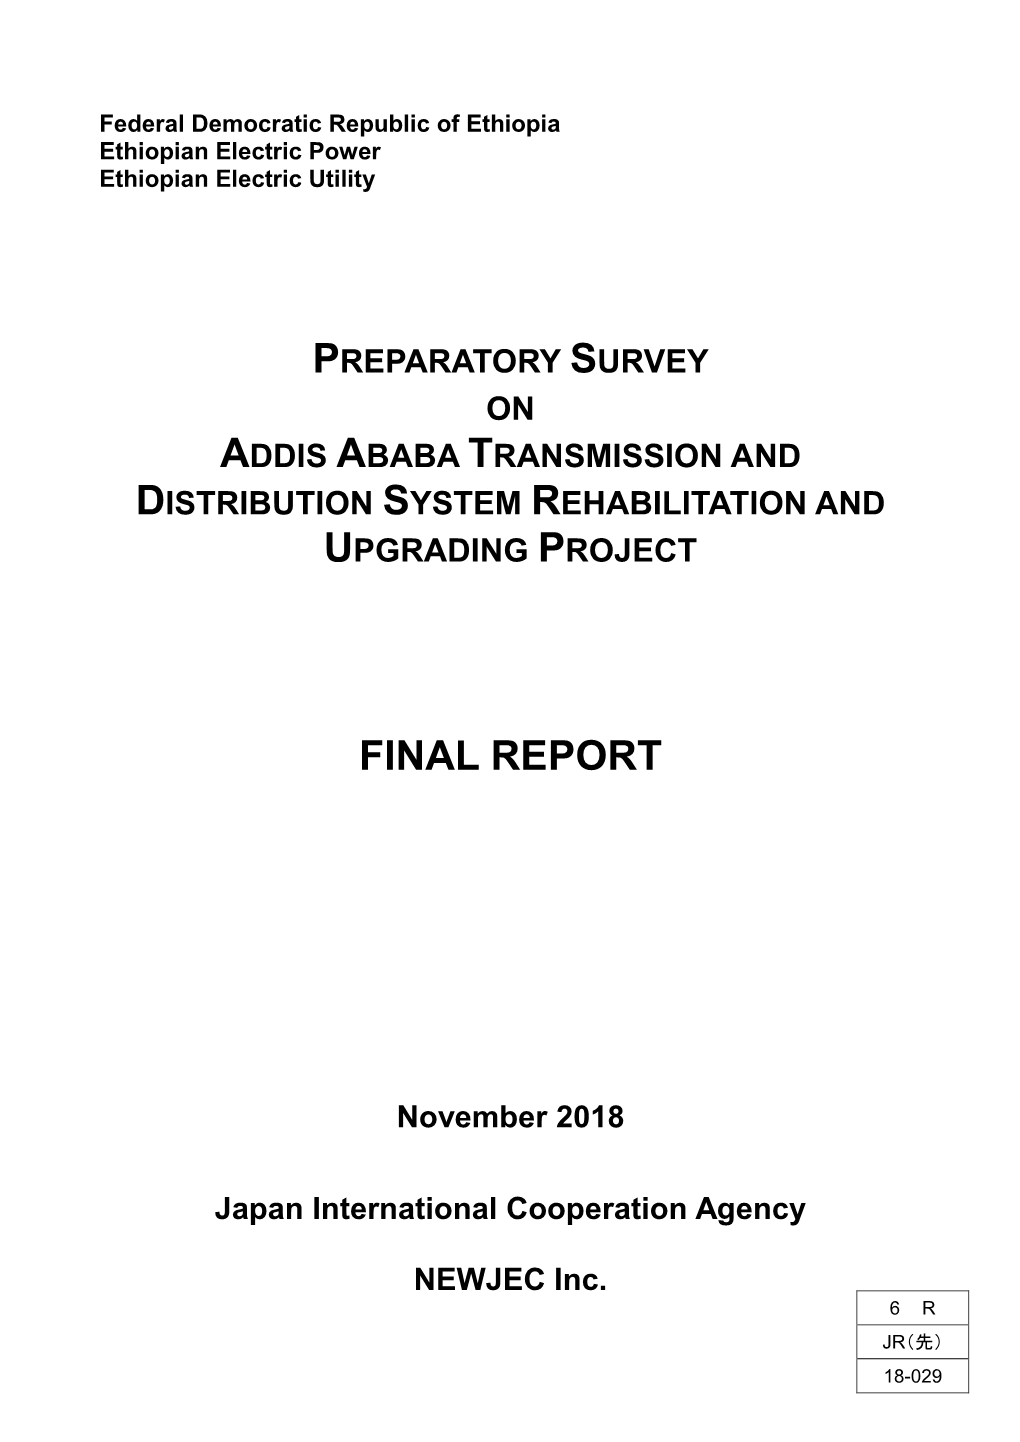 Addis Ababa Transmission and Distribution System Rehabilitation and Upgrading Project